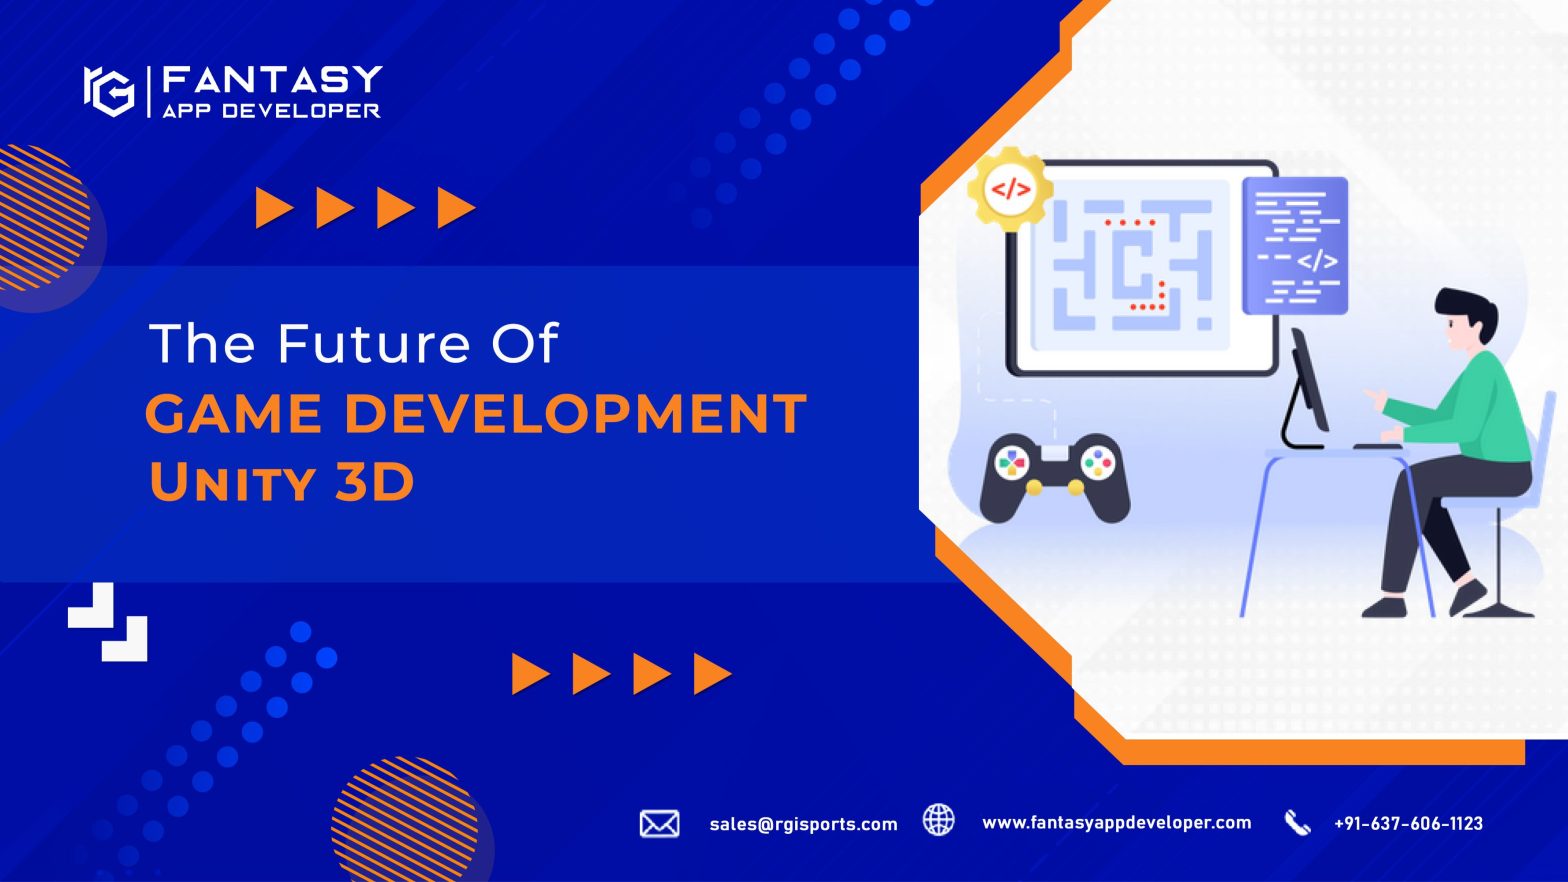 The Future Of Game Development Unity 3D